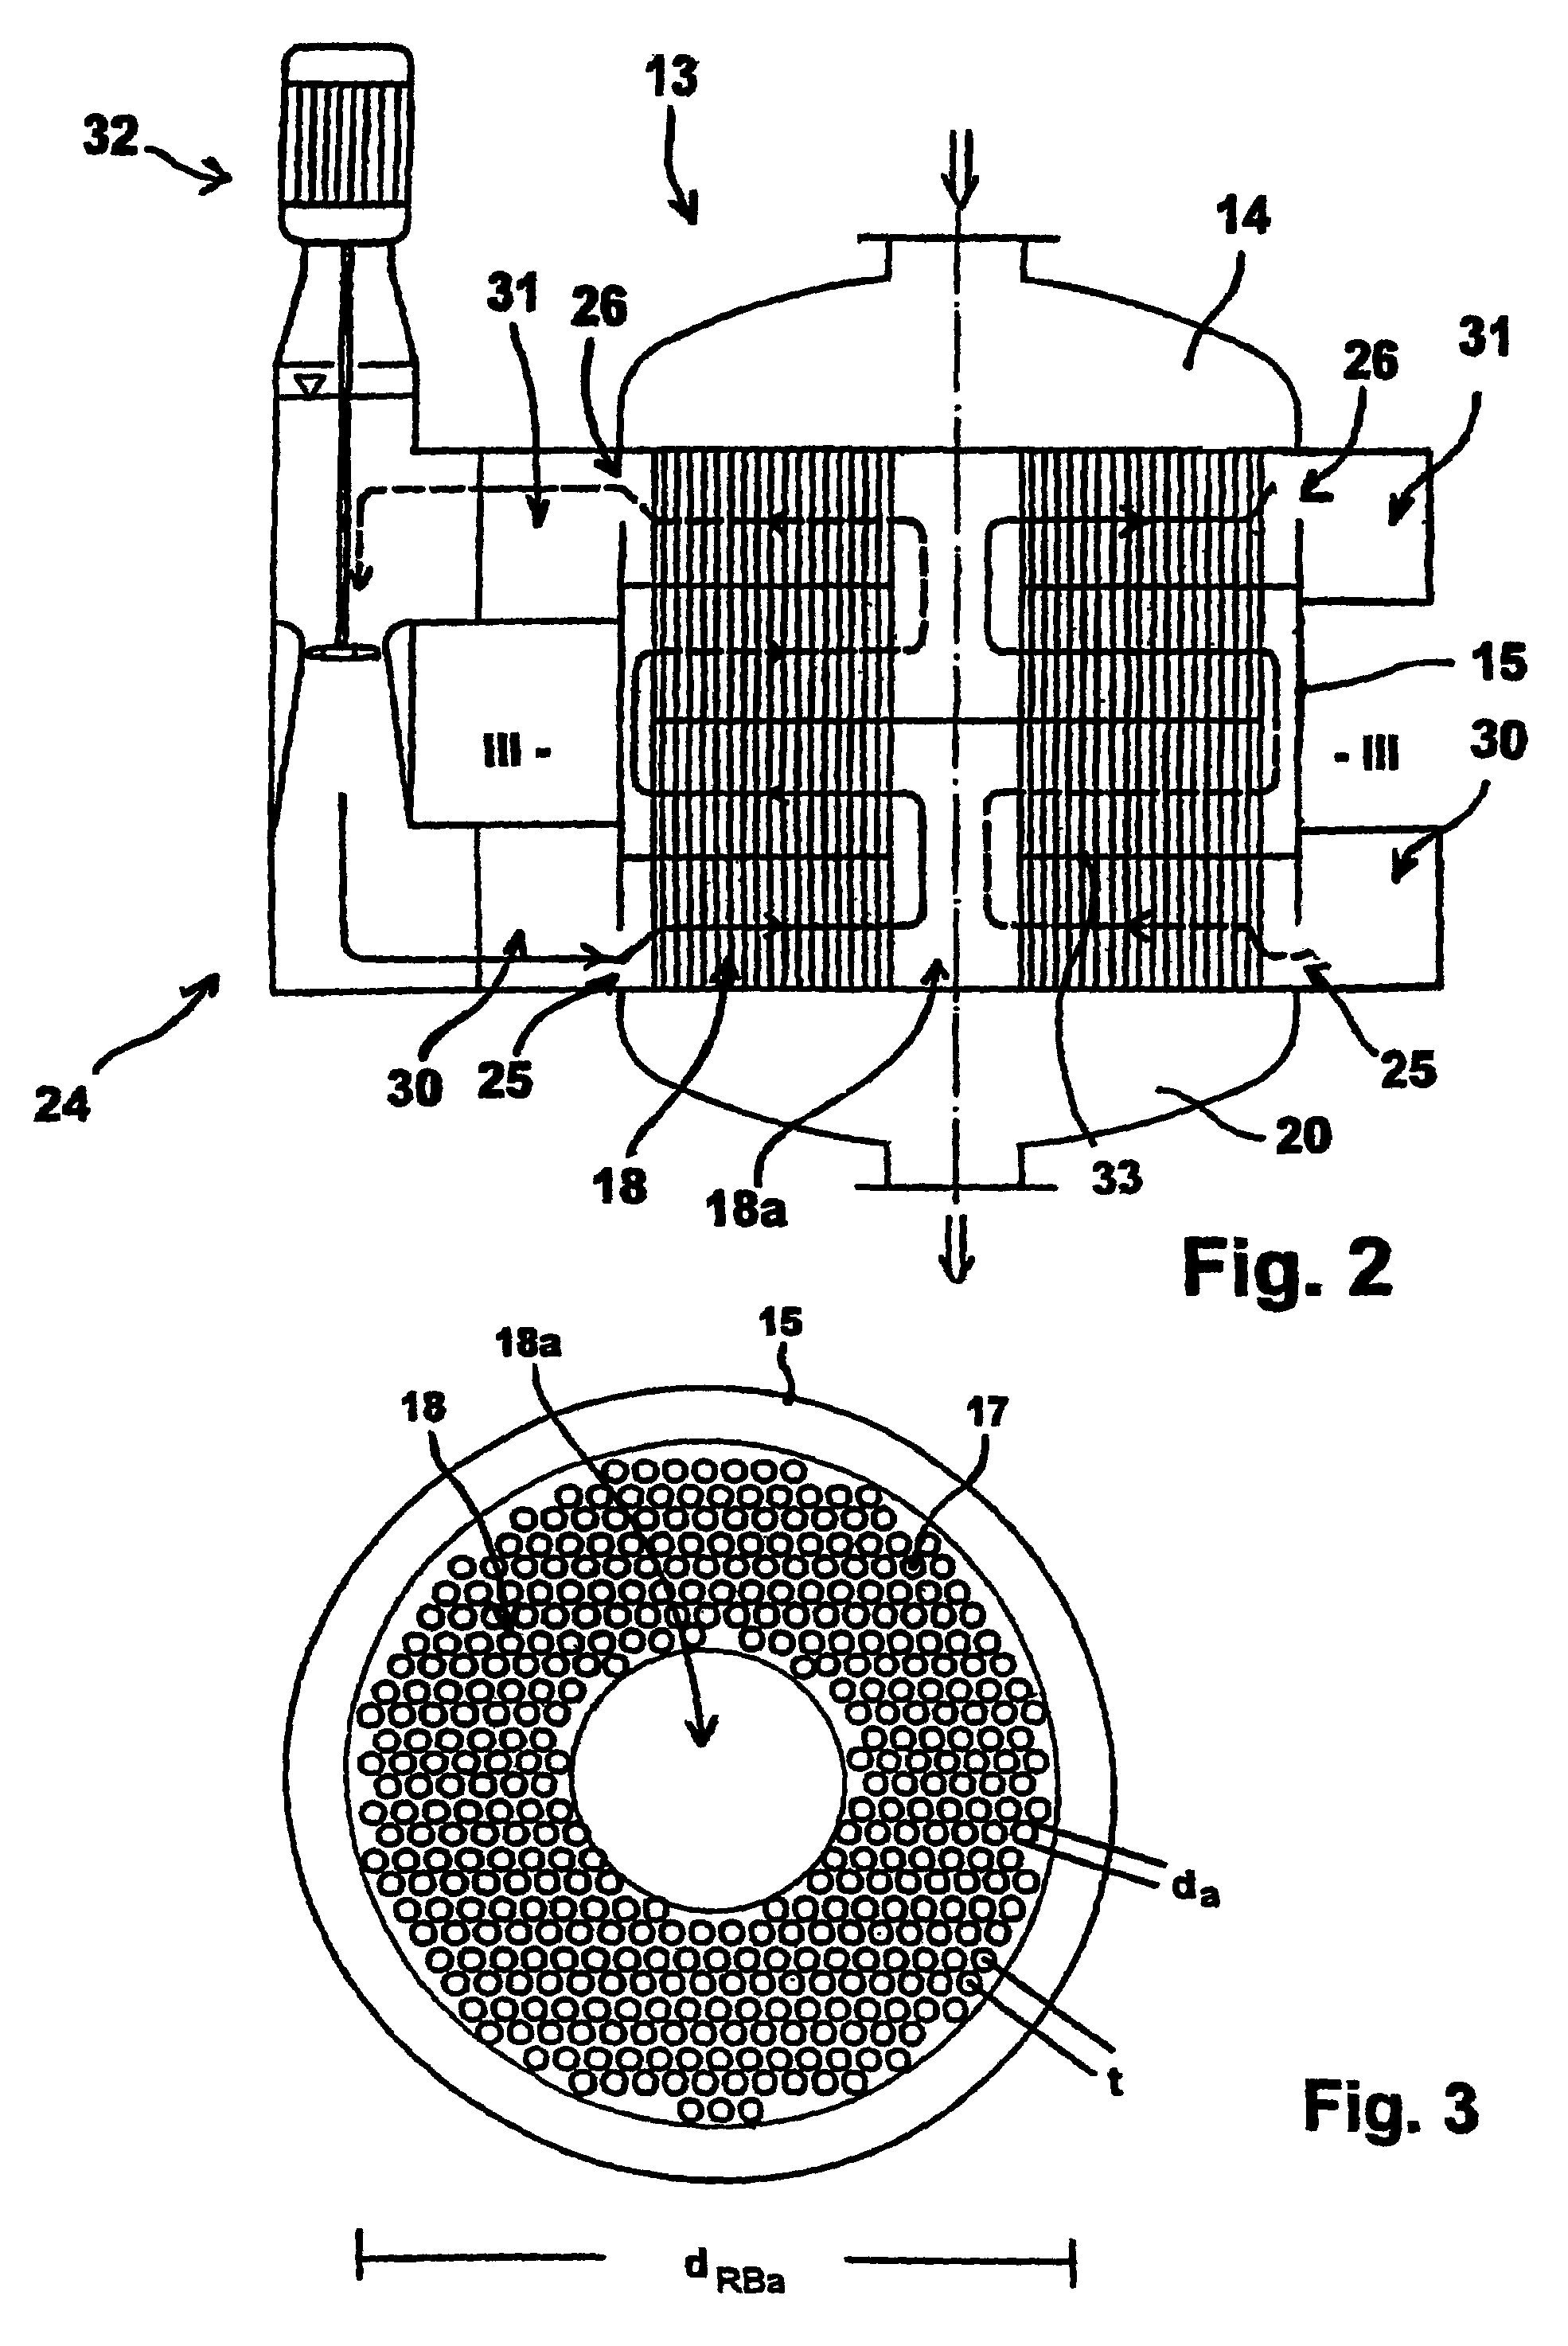 Multi-tube fixed-bed reactor, especially for catalytic gas phase reactions